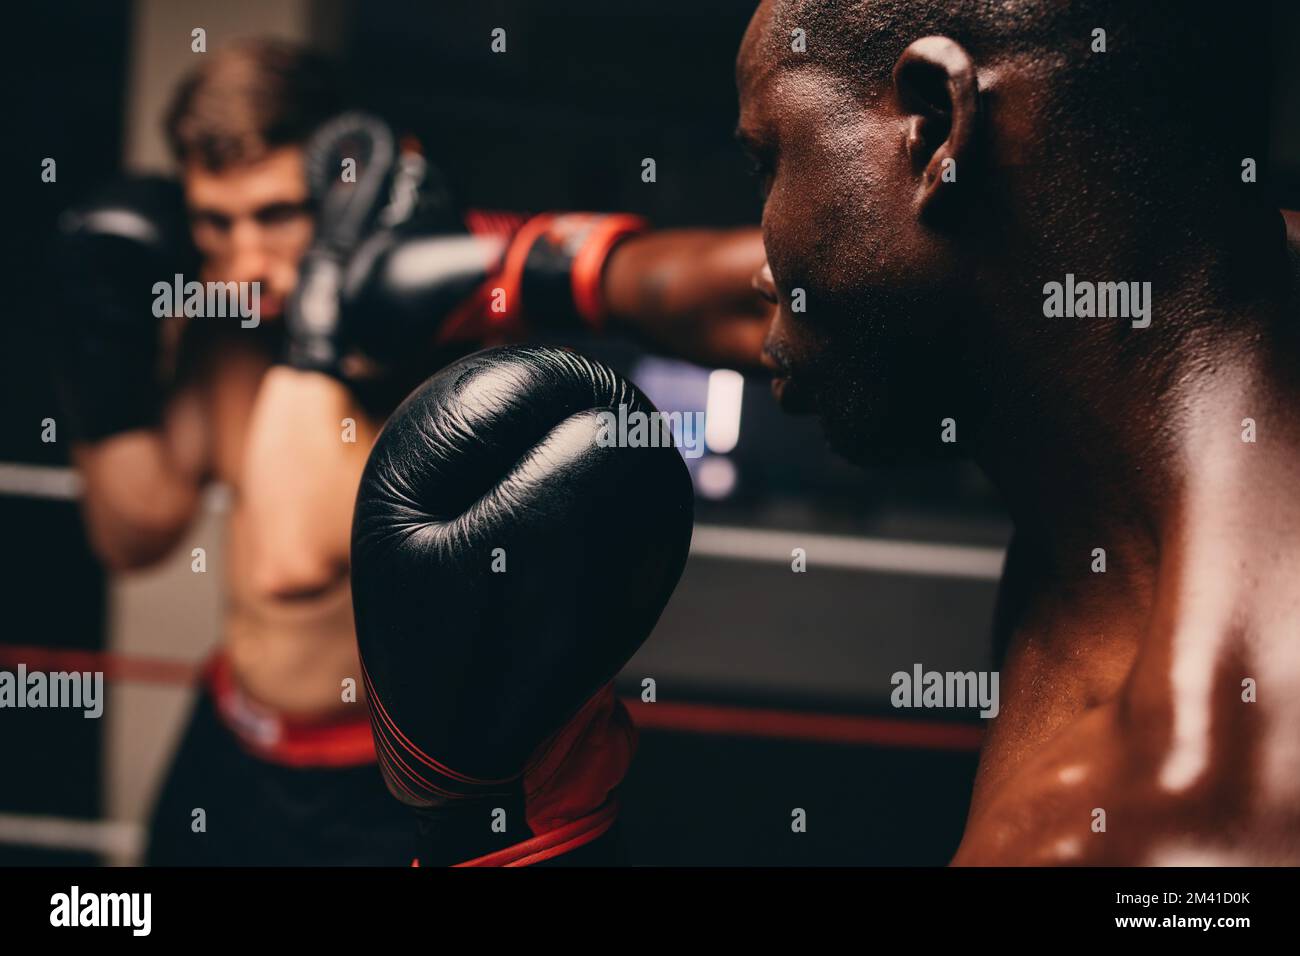 Boxer striking his sparring partner with a gloved fist in a boxing ring. Two young boxers training together in a boxing gym. Stock Photo